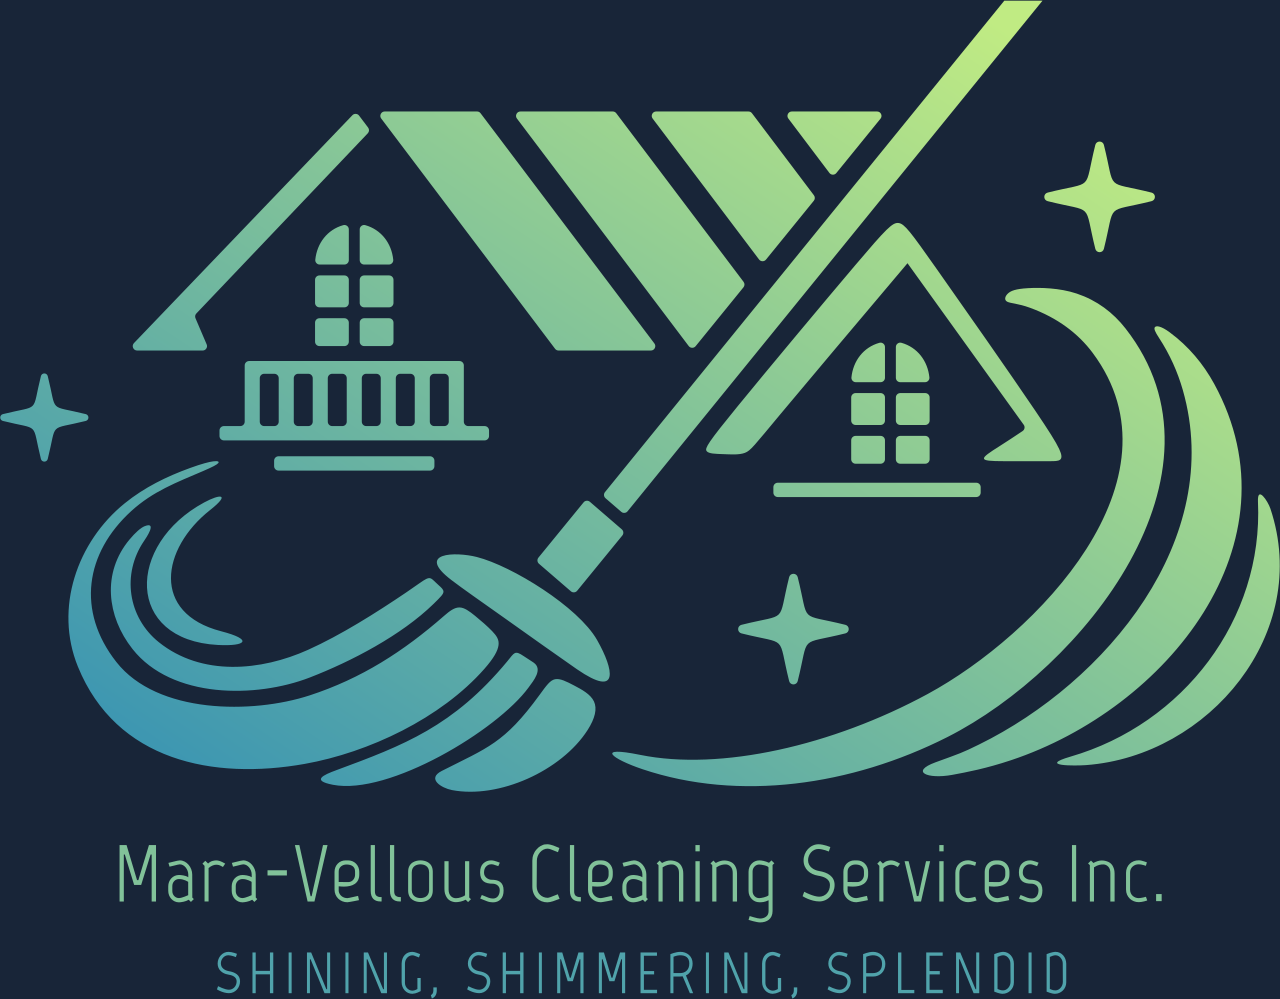 Mara-Vellous Cleaning Services Inc.'s logo